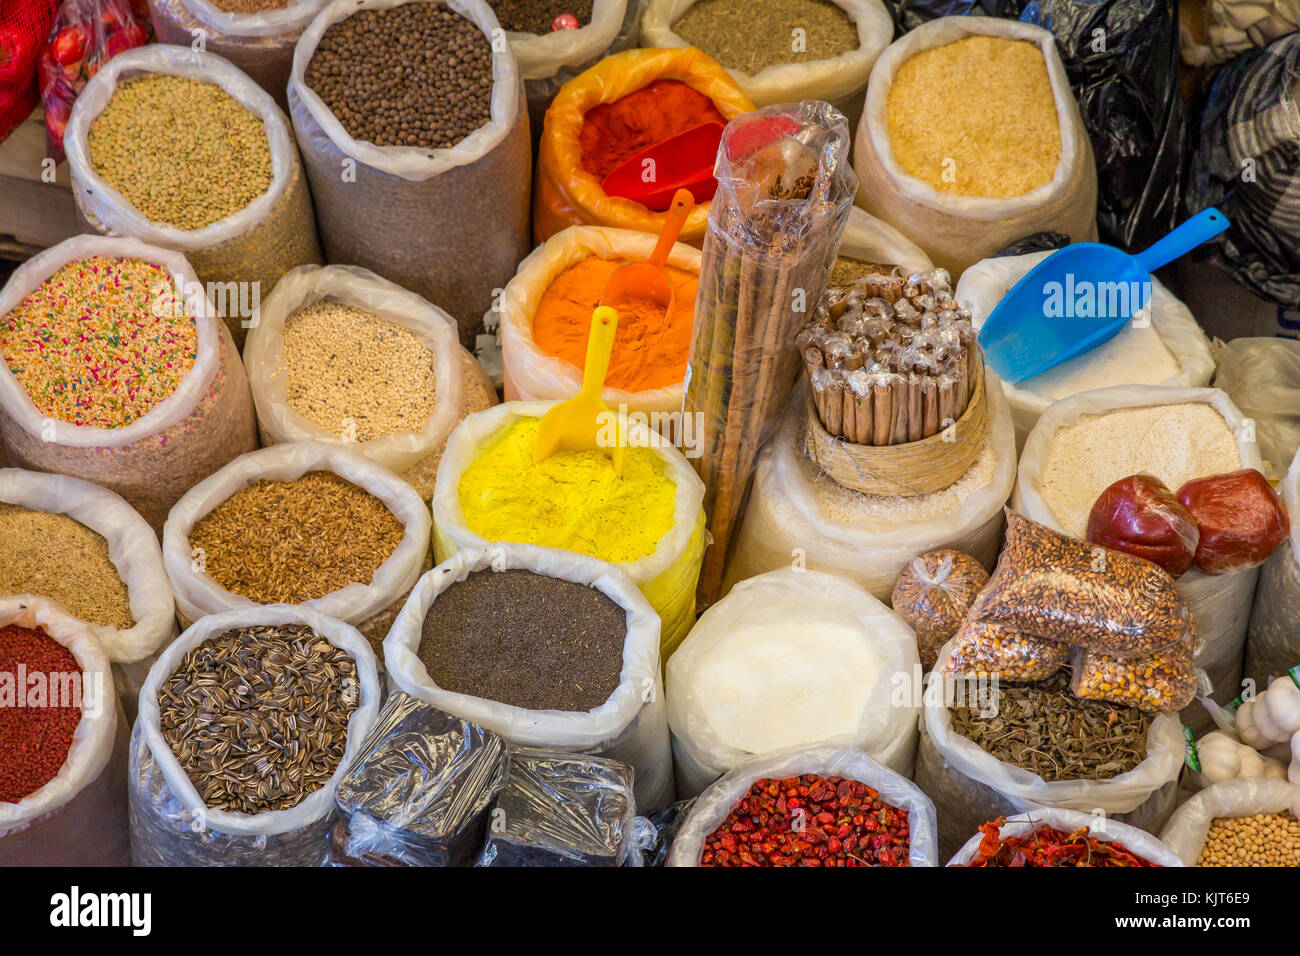 Herbs, spices and seeds at a market stand | Panajachel | Guatemala Stock Photo